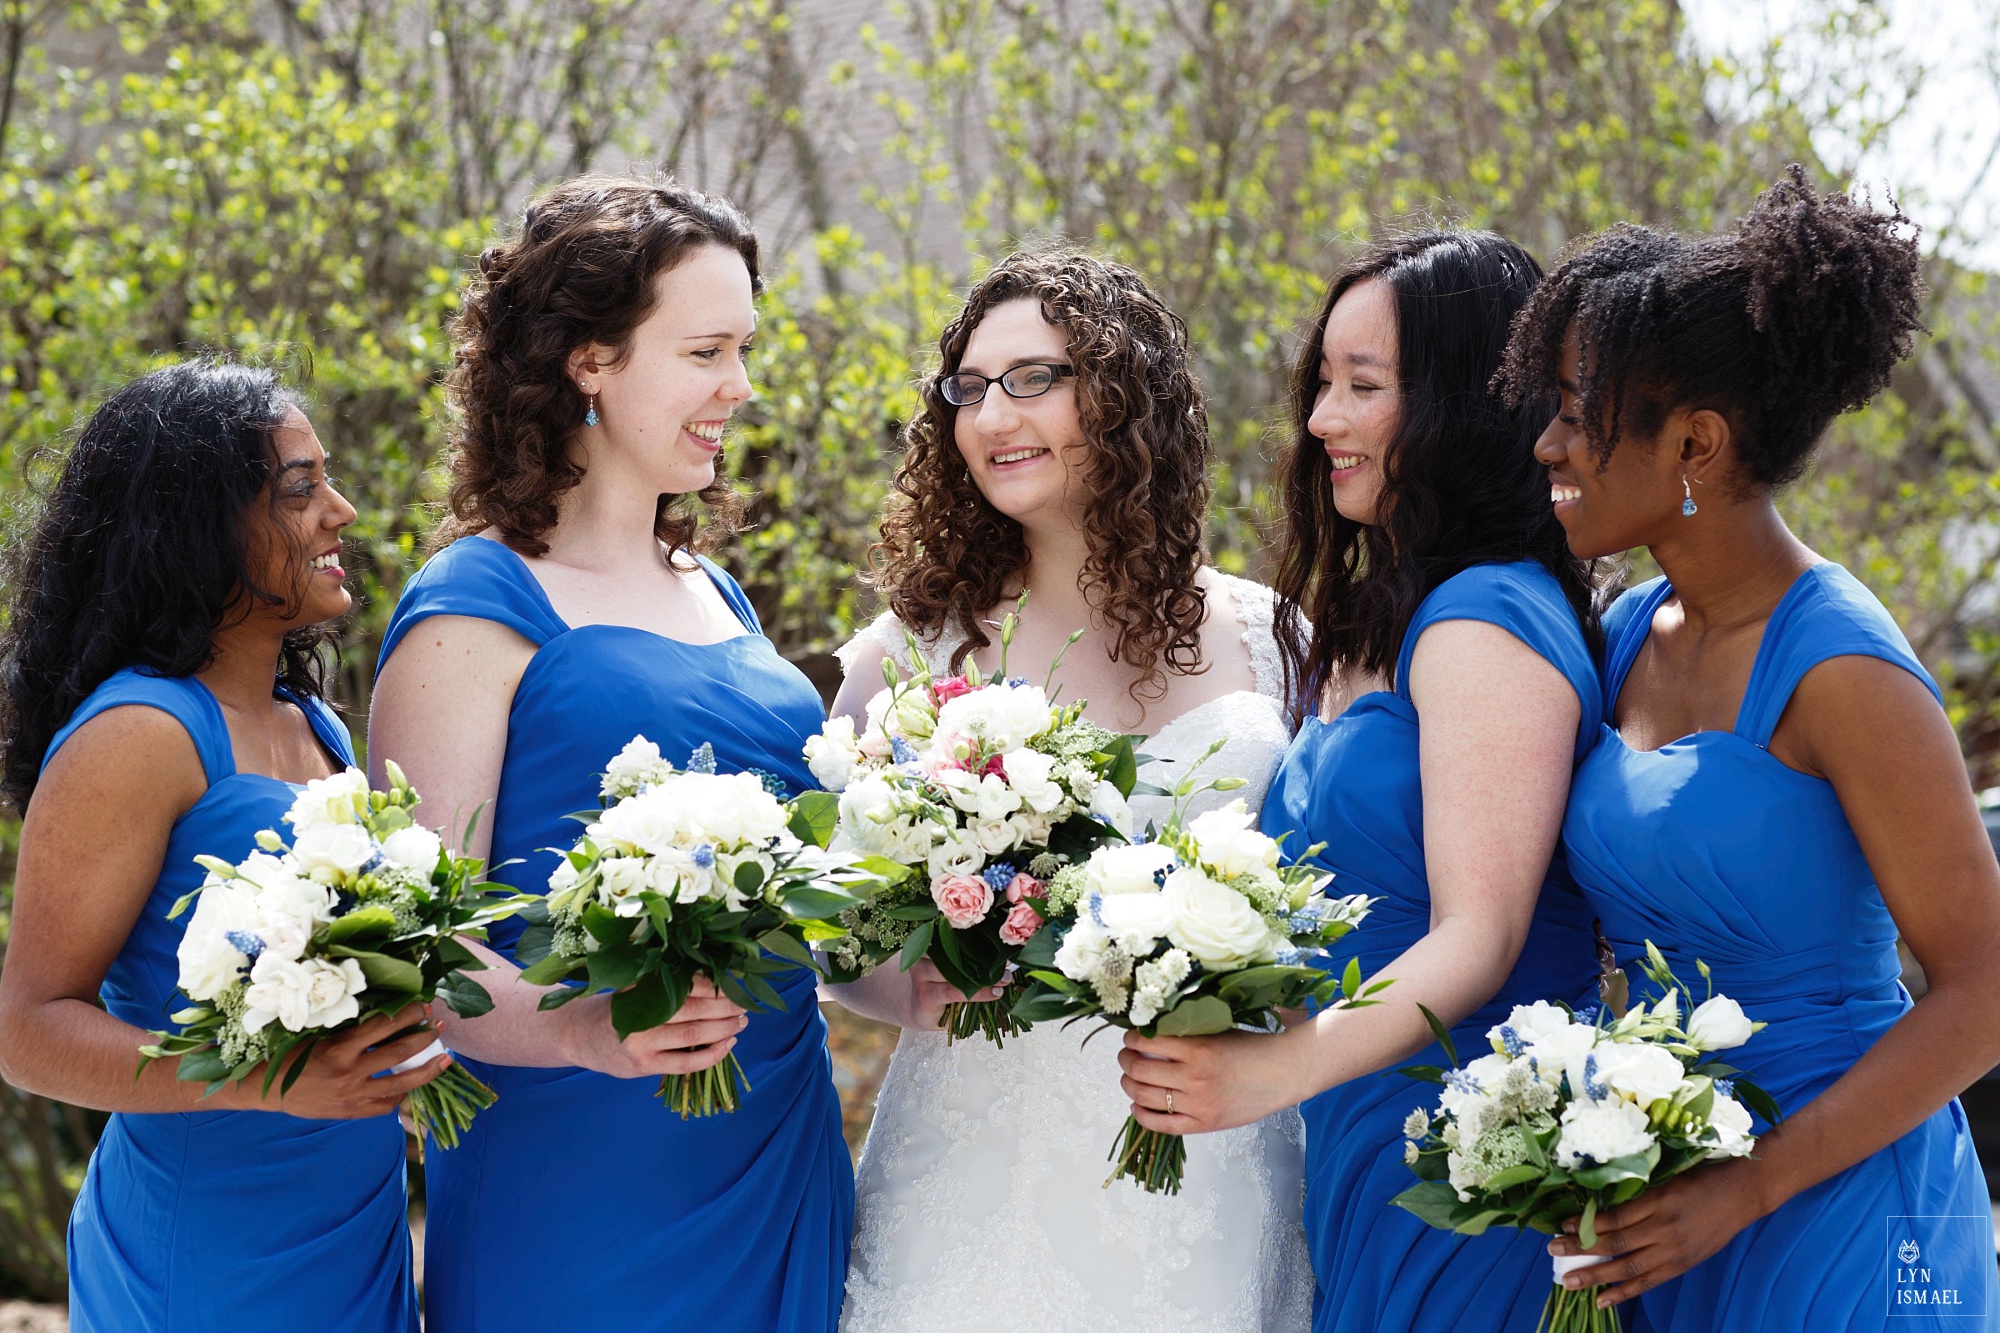 Bride and her bridesmaids at a wedding in Wellesley, Ontario.